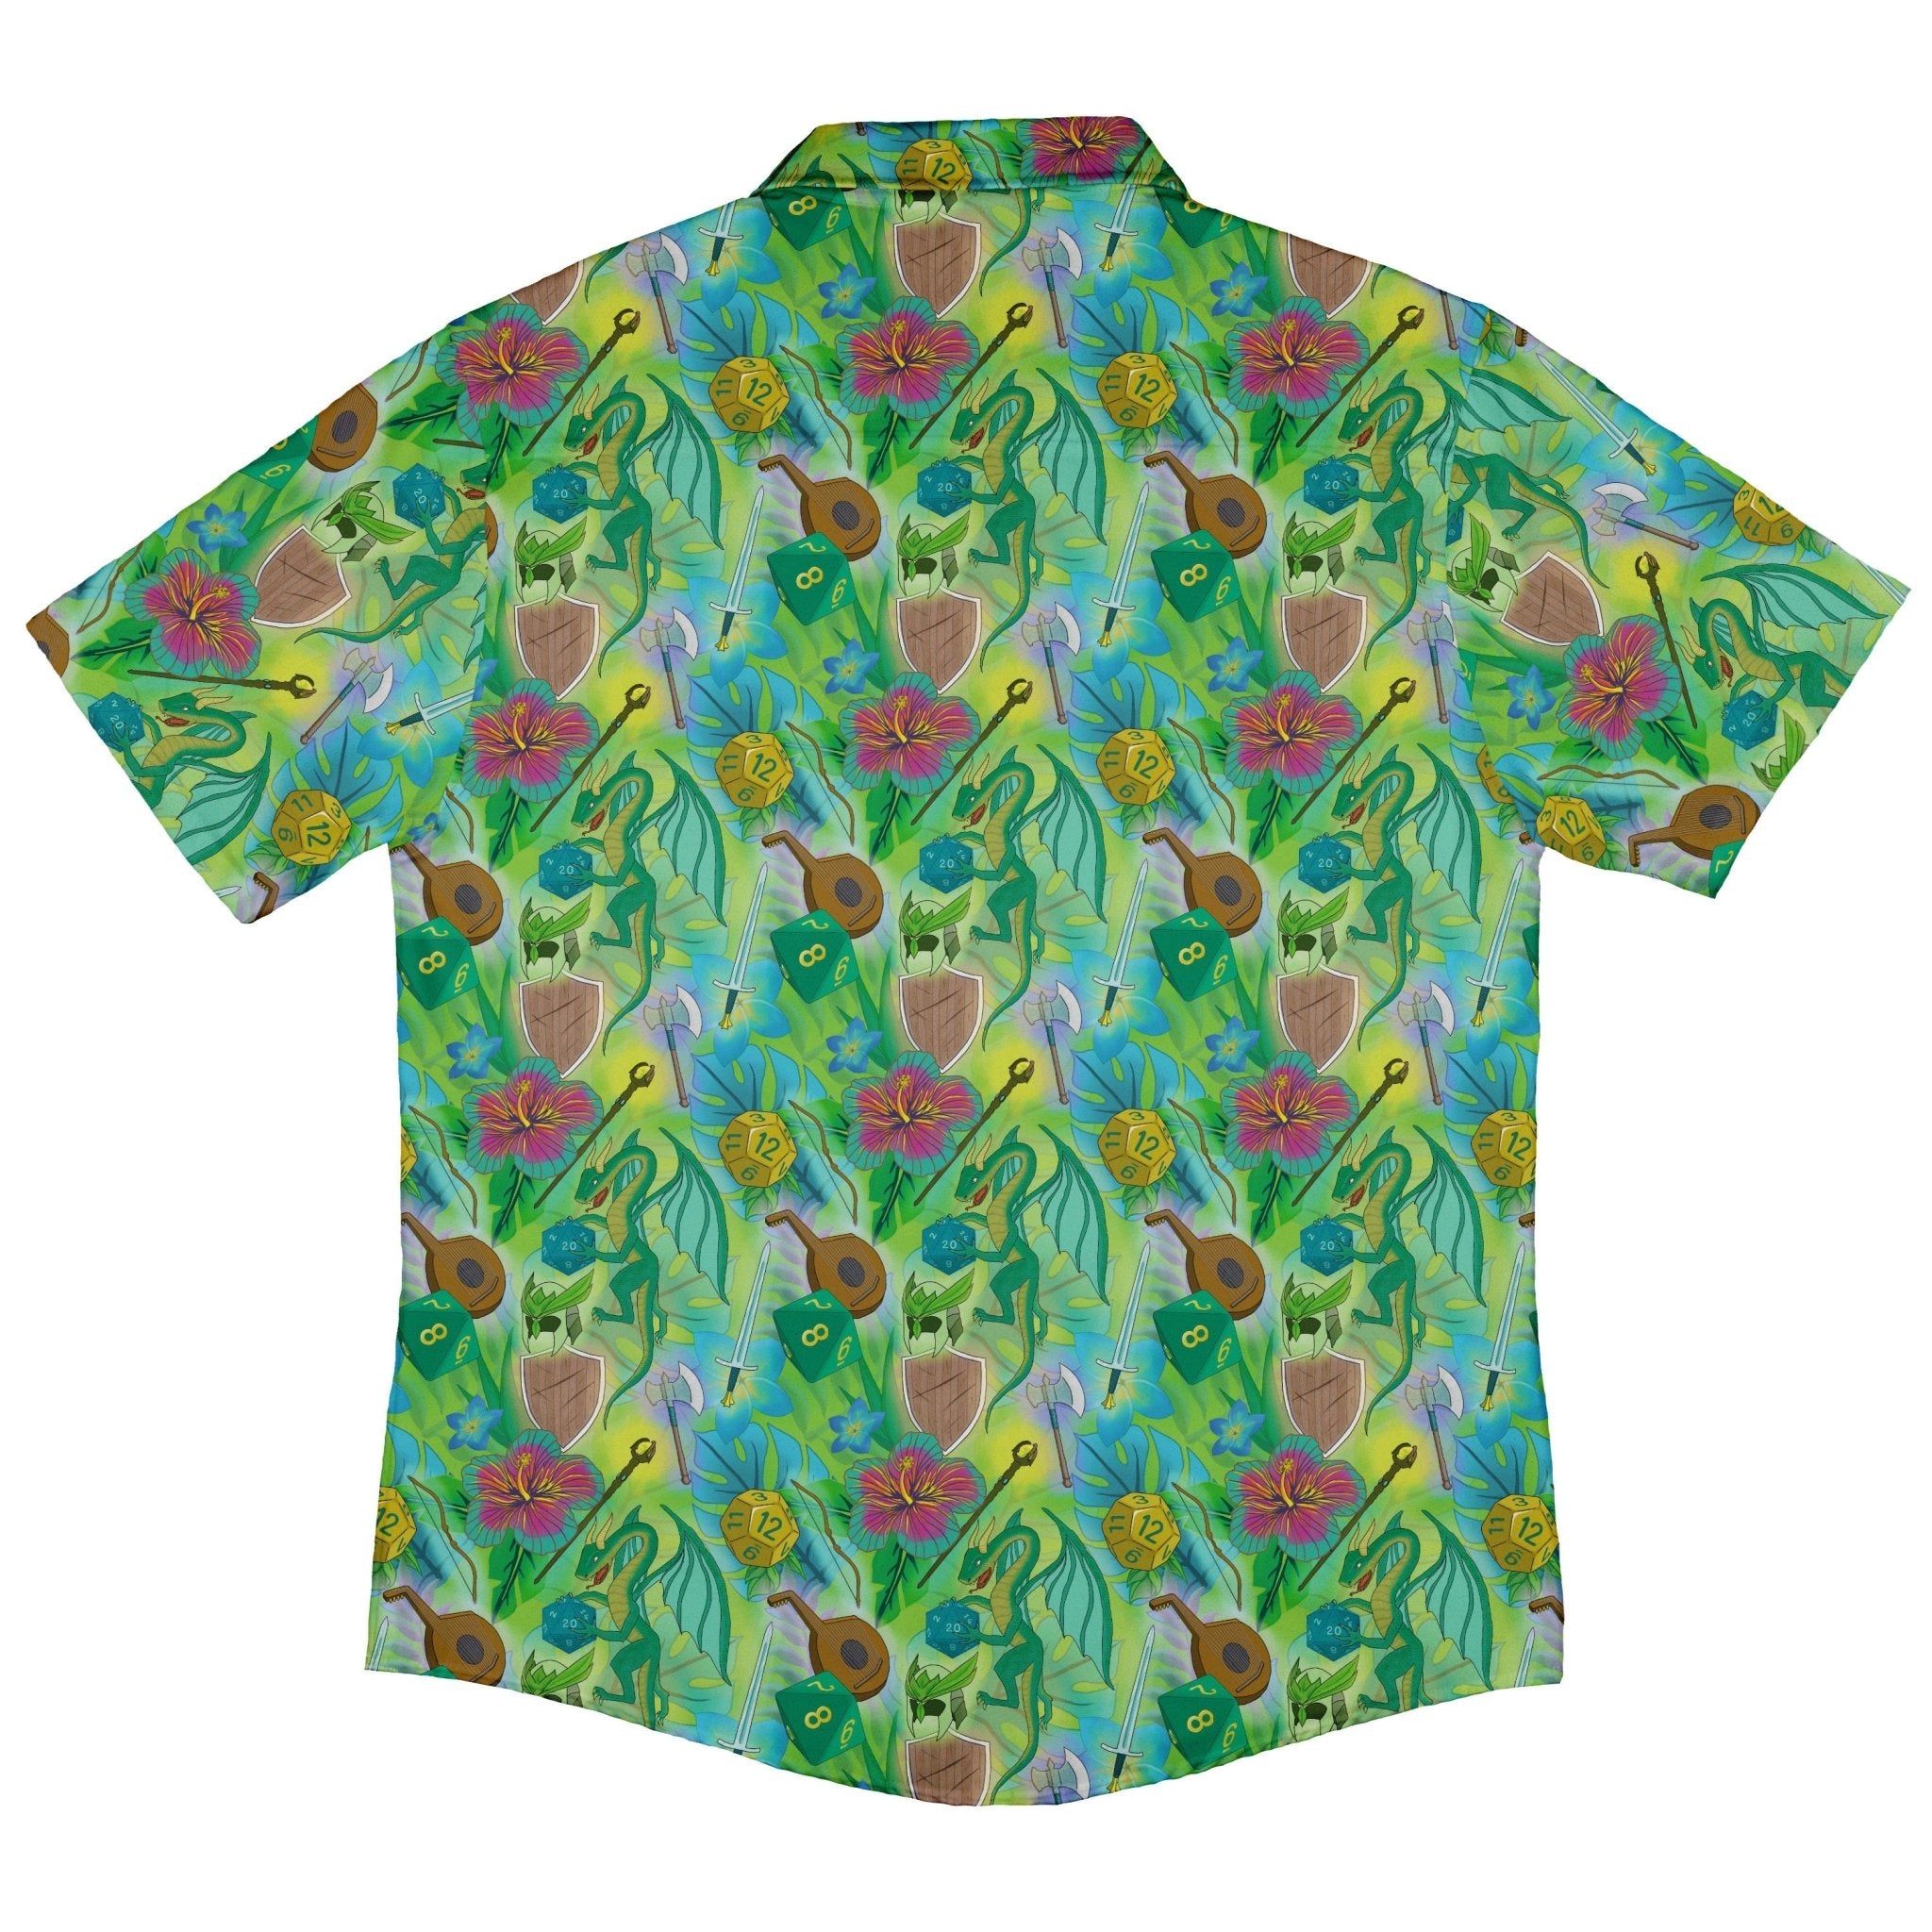 Green Dragon Encounter Dnd Button Up Shirt - adult sizing - Animal Patterns - Designs by Nathan